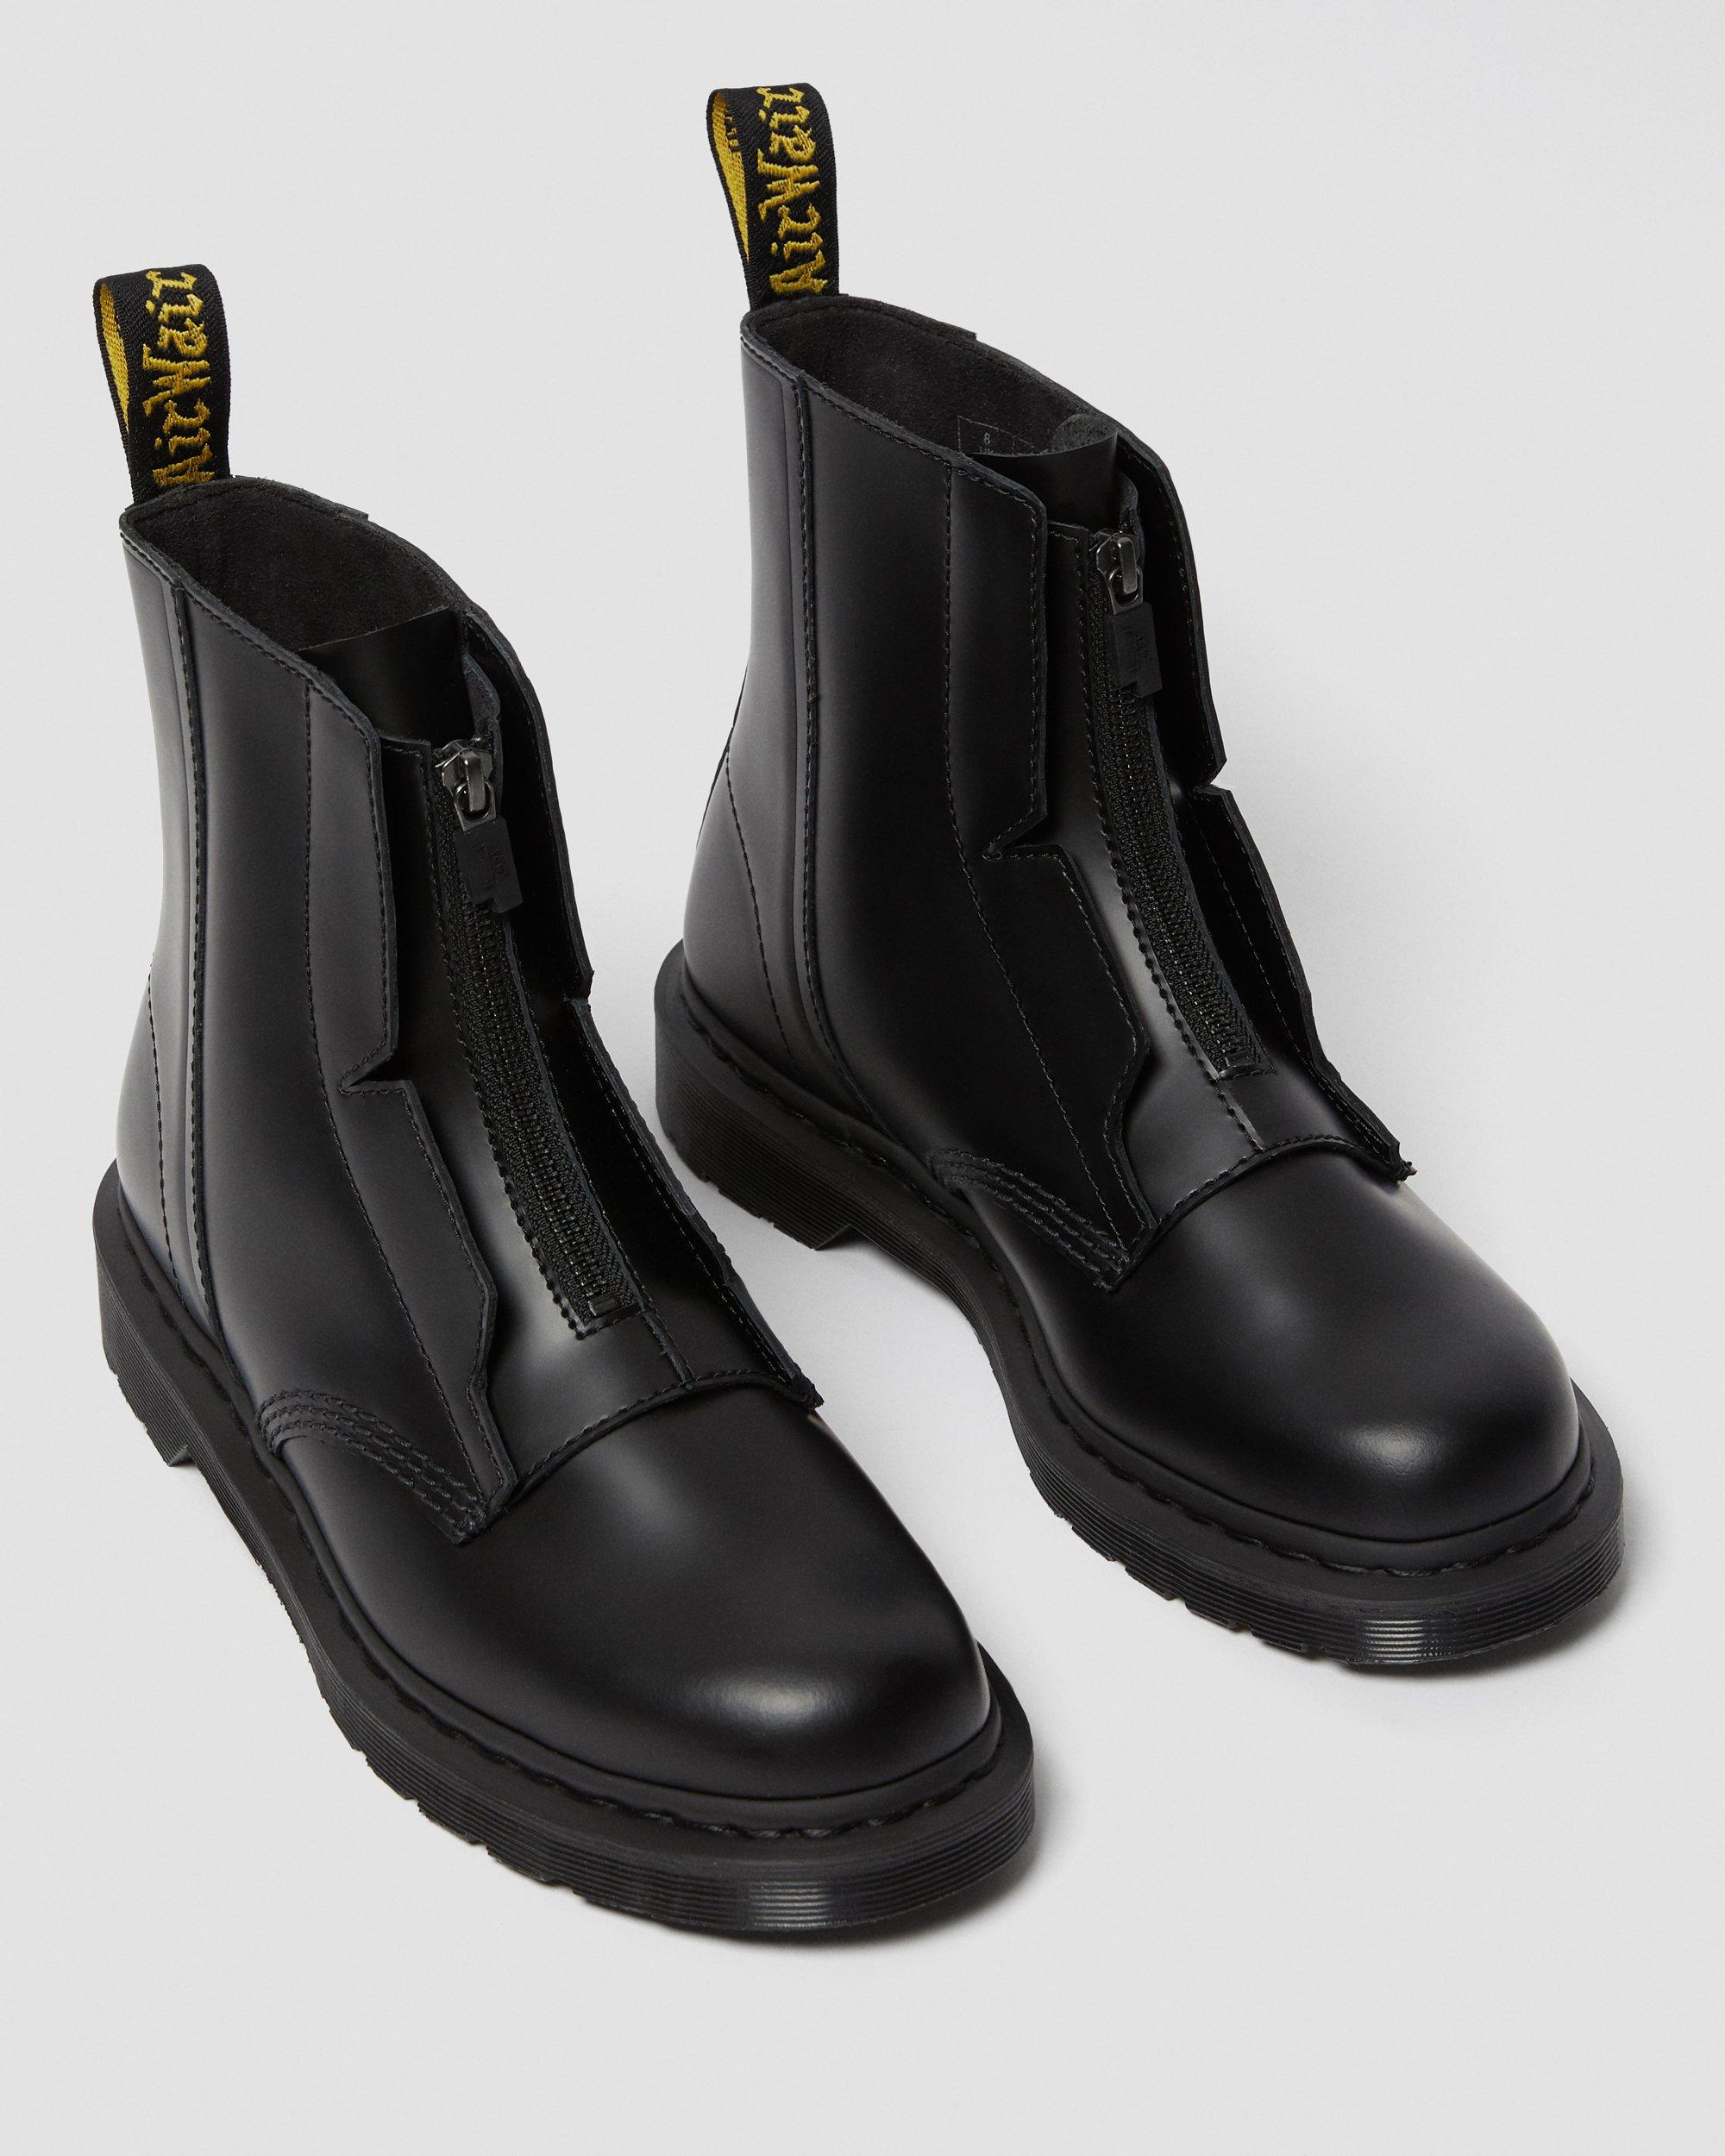 https://i1.adis.ws/i/drmartens/26518001.91.jpg?$large$1460 A-COLD-WALL* LEATHER ANKLE BOOTS Dr. Martens